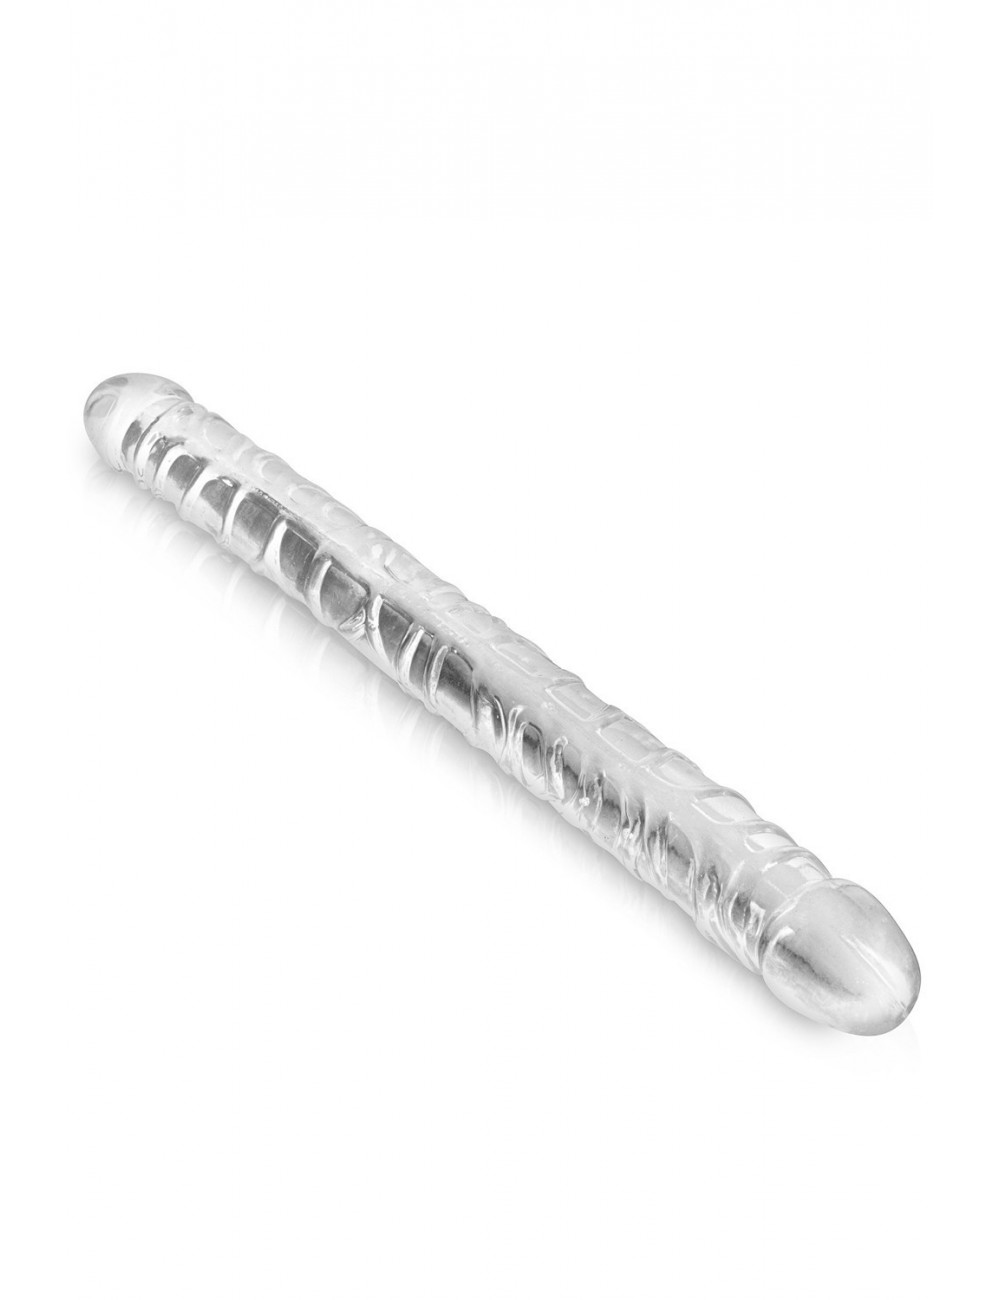 Sextoys Double Dong Cristal Jelly 34cm 